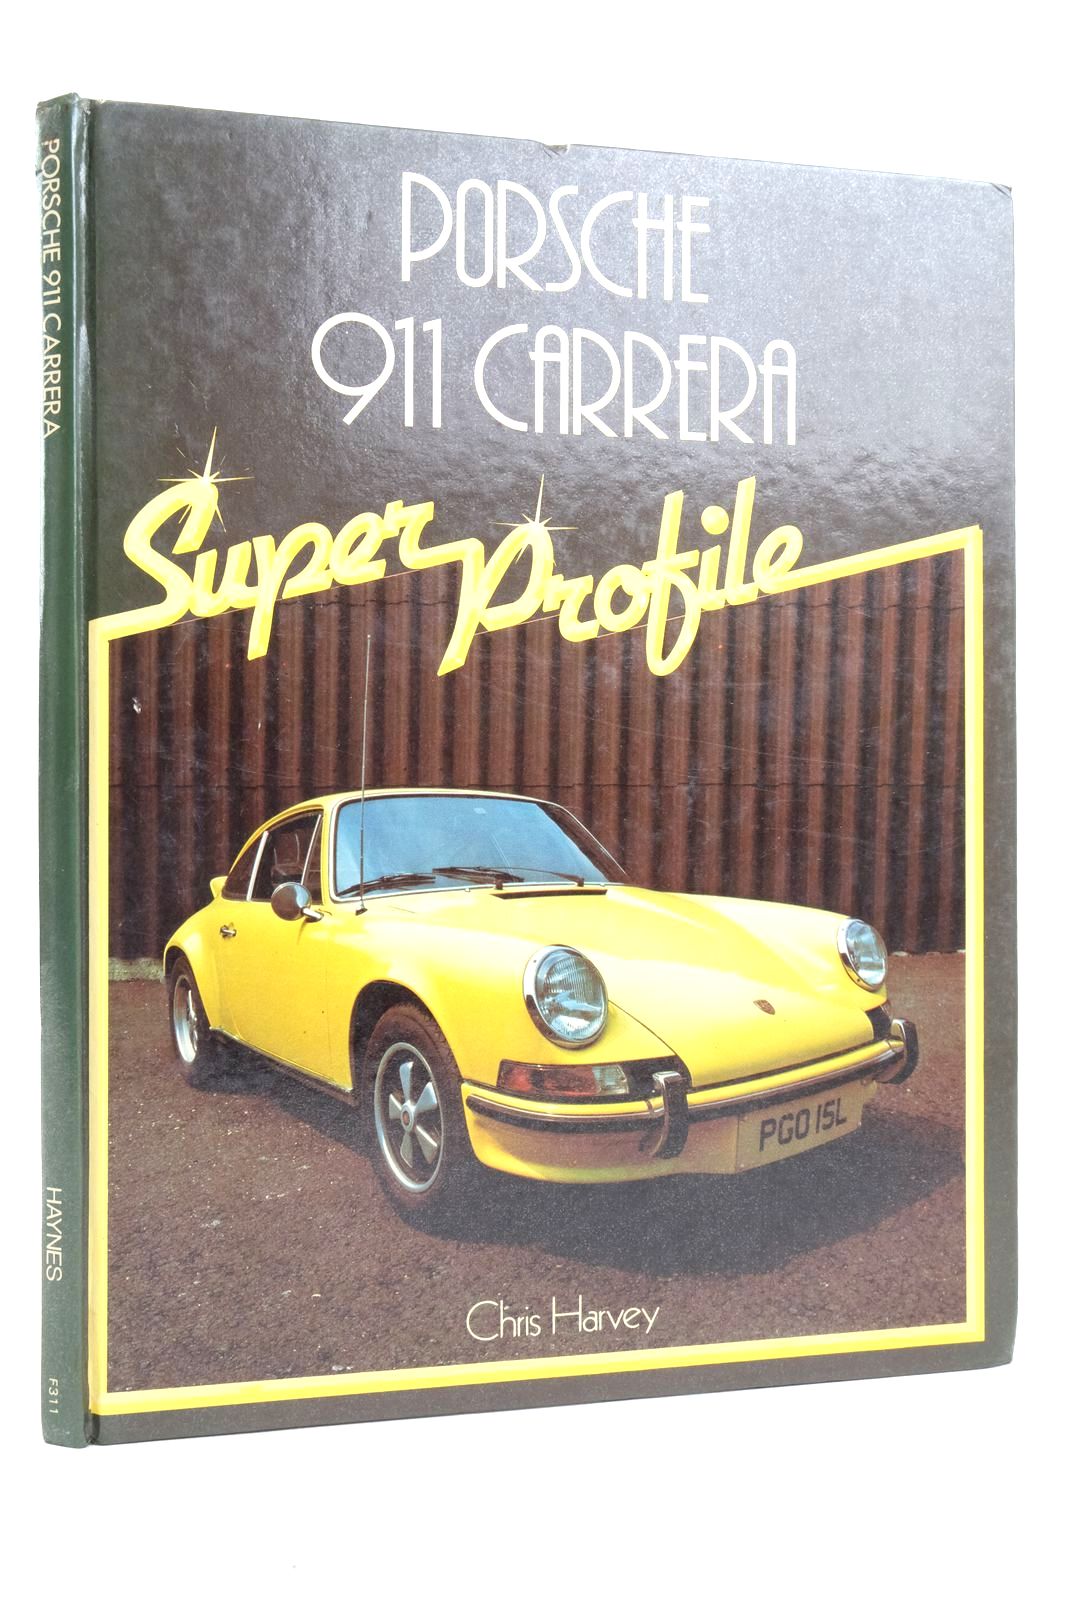 Photo of PORSCHE 911 CARRERA written by Harvey, Chris published by Haynes Publishing Group (STOCK CODE: 2136343)  for sale by Stella & Rose's Books